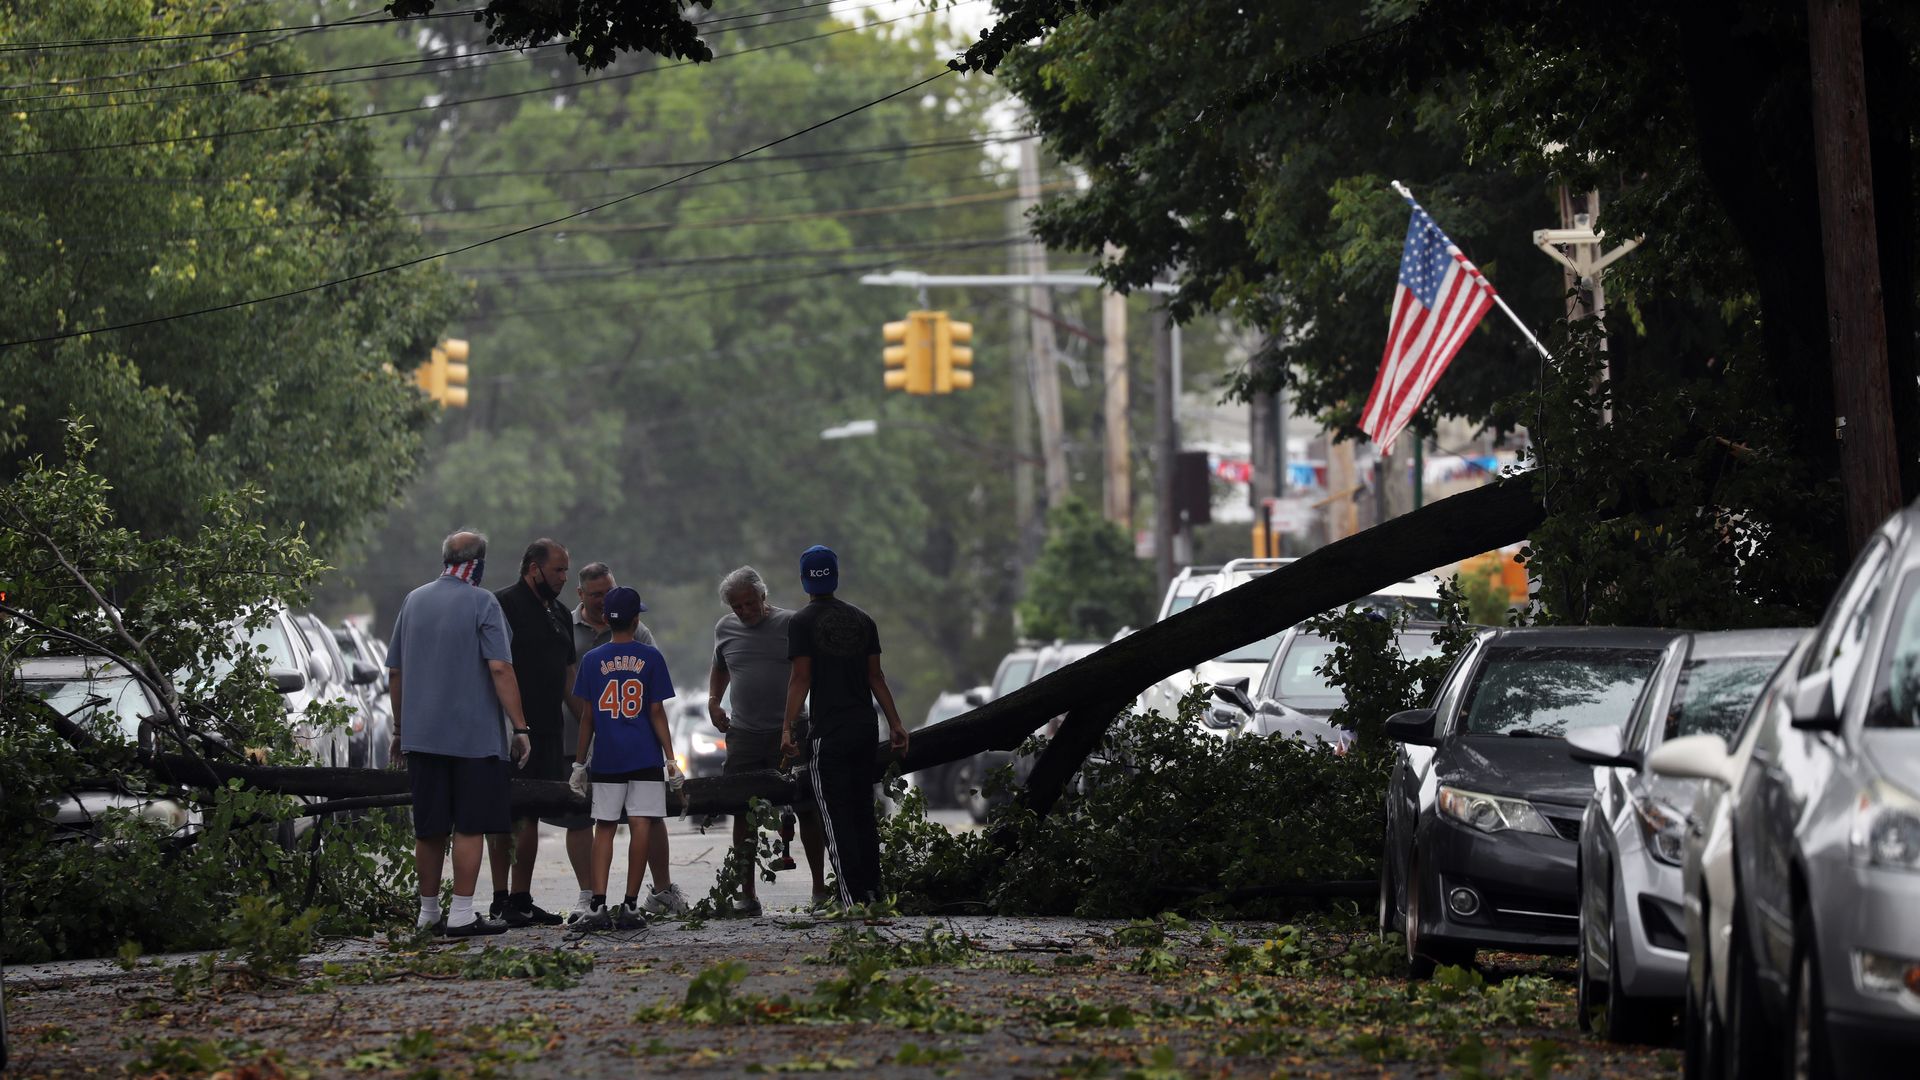 A group of people stand around a fallen tree in the street